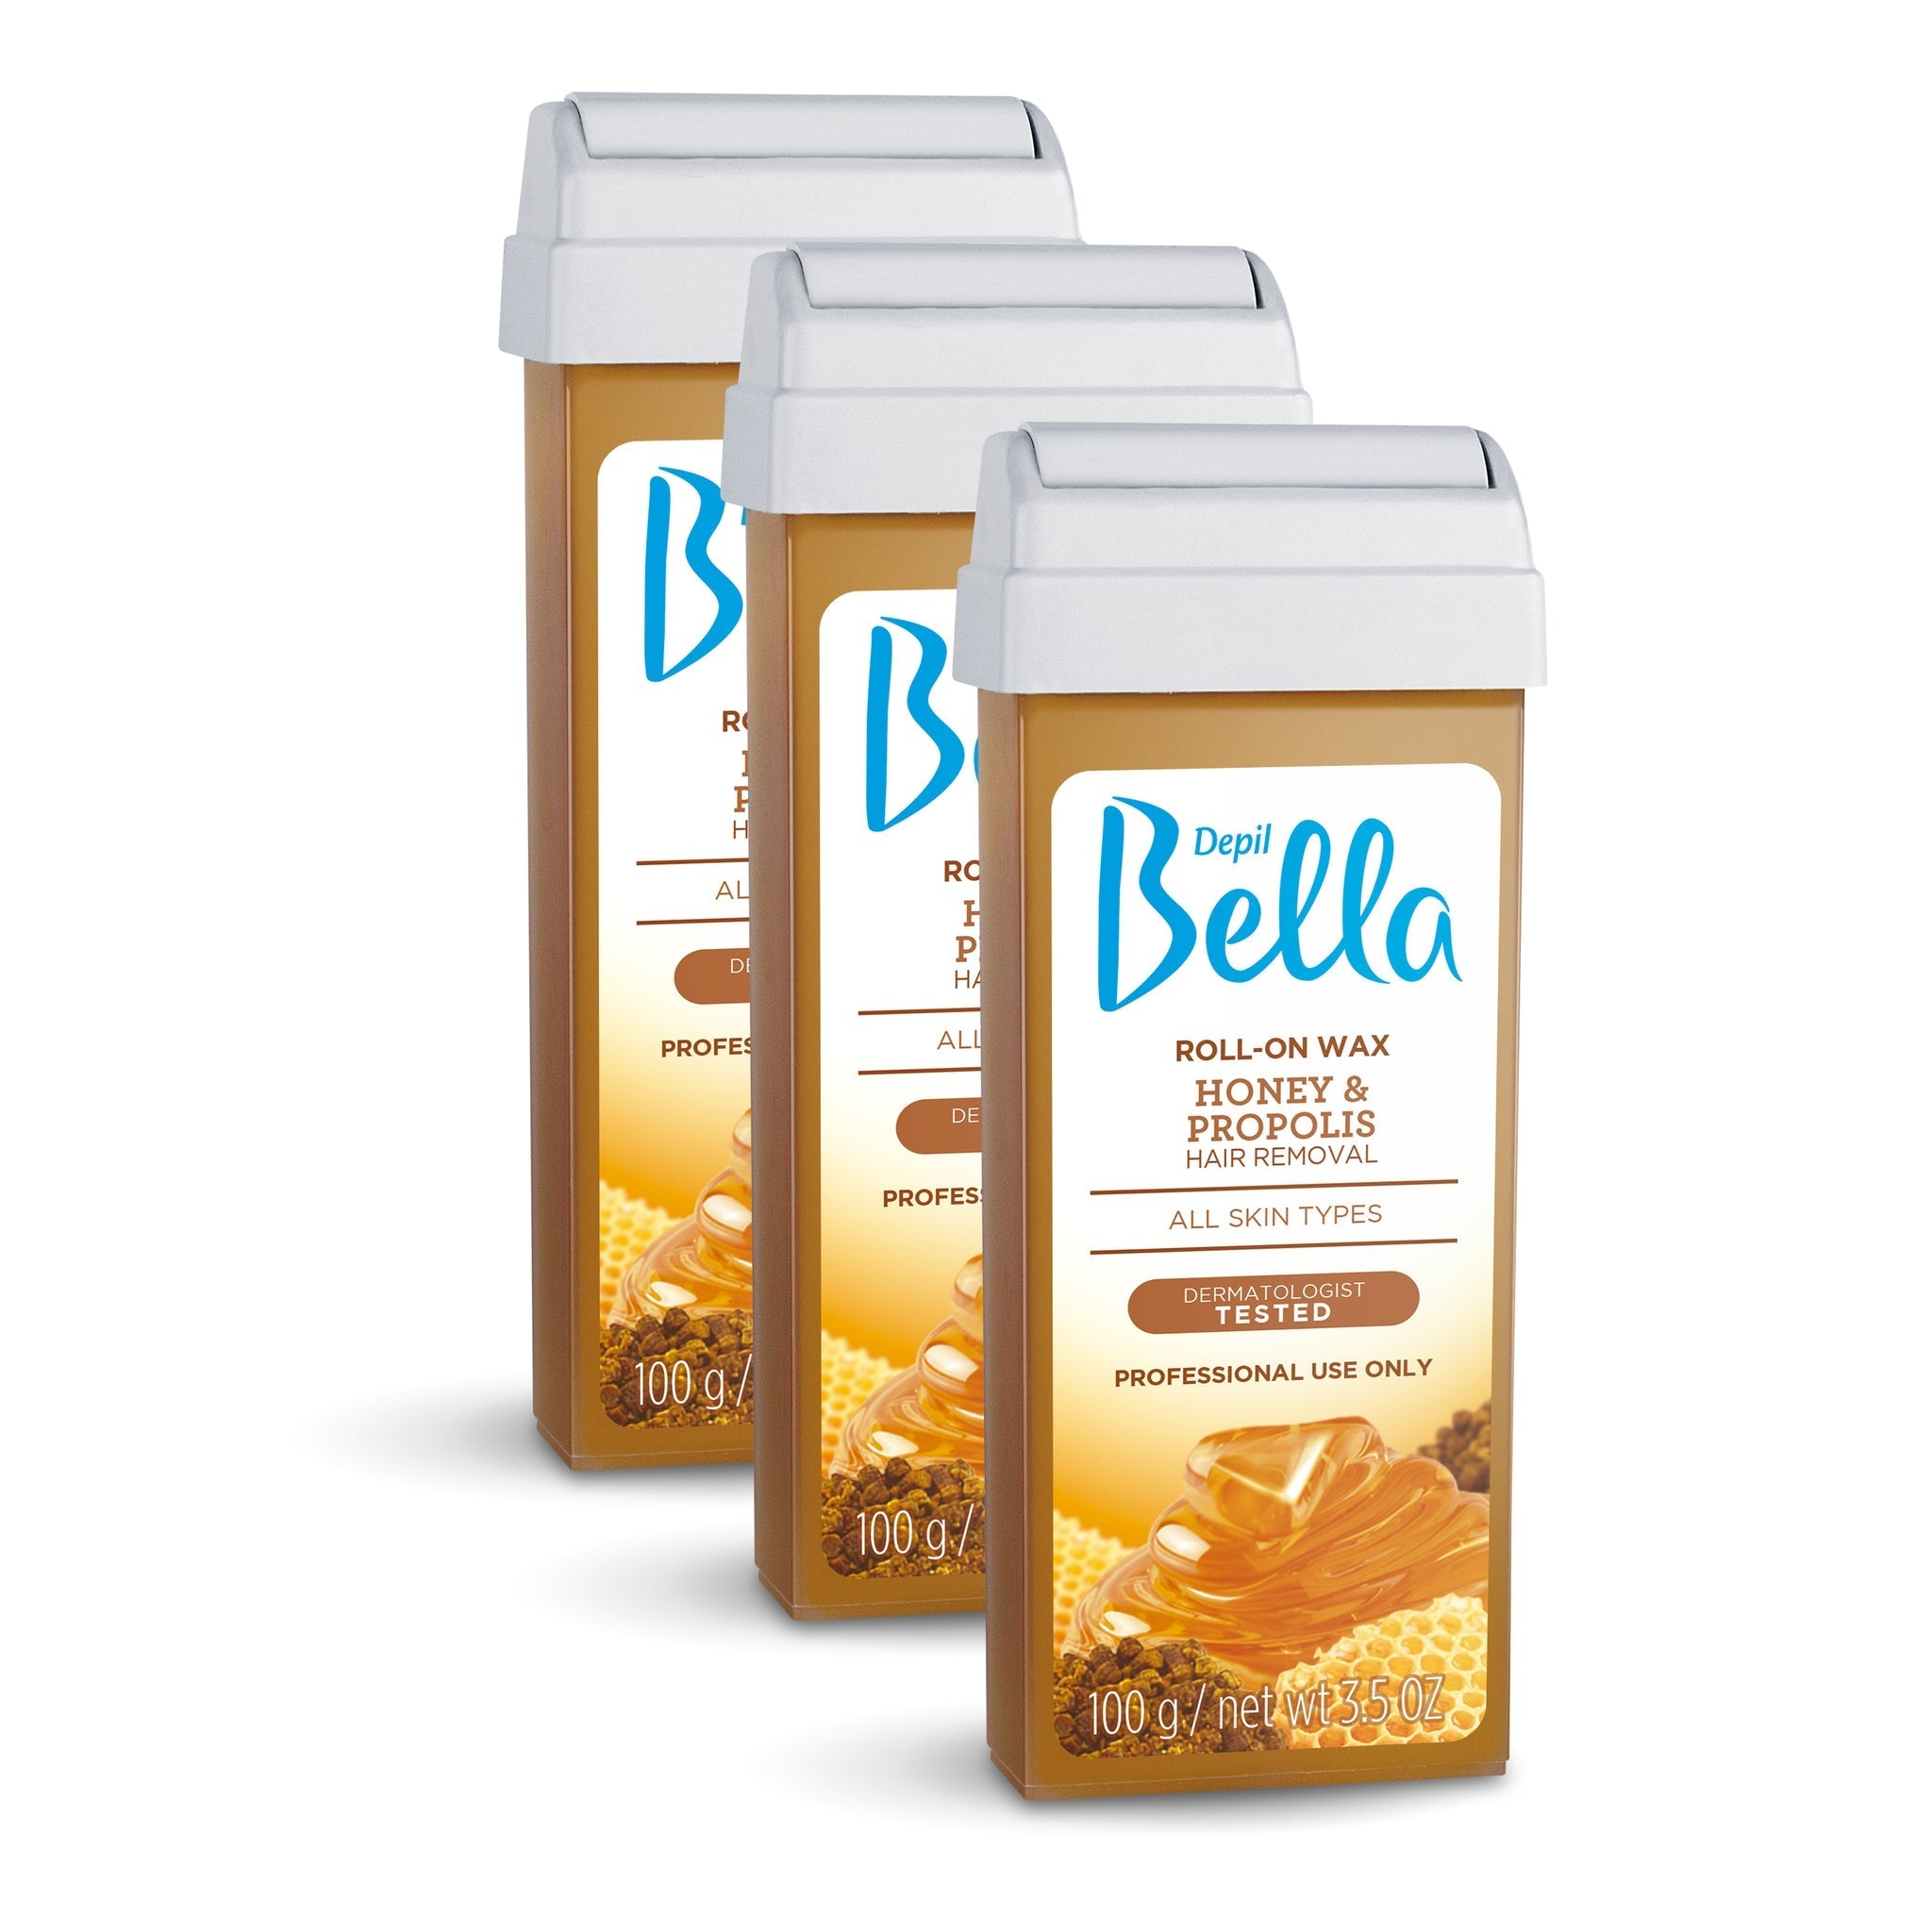 Depil Bella Hair Removal Wax Depil Bella Roll-On Honey with Propolis Wax Hair Removal Cartridges 3.52Oz (3 Units )